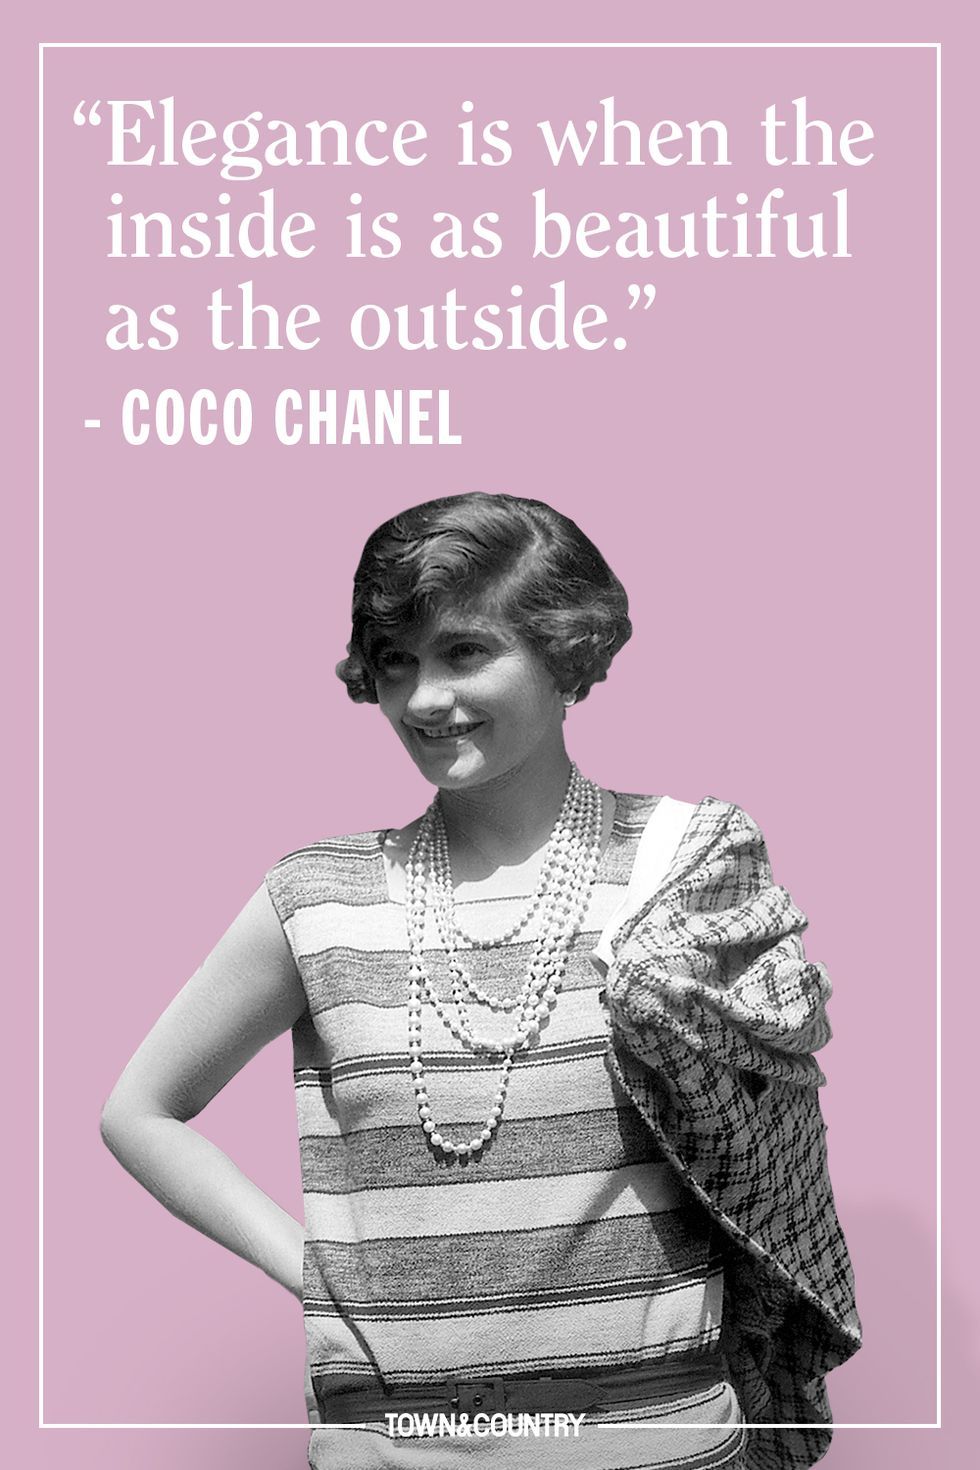 25 Coco Chanel Quotes Every Woman Should Live By  Coco chanel quotes Coco  chanel pictures Chanel quotes